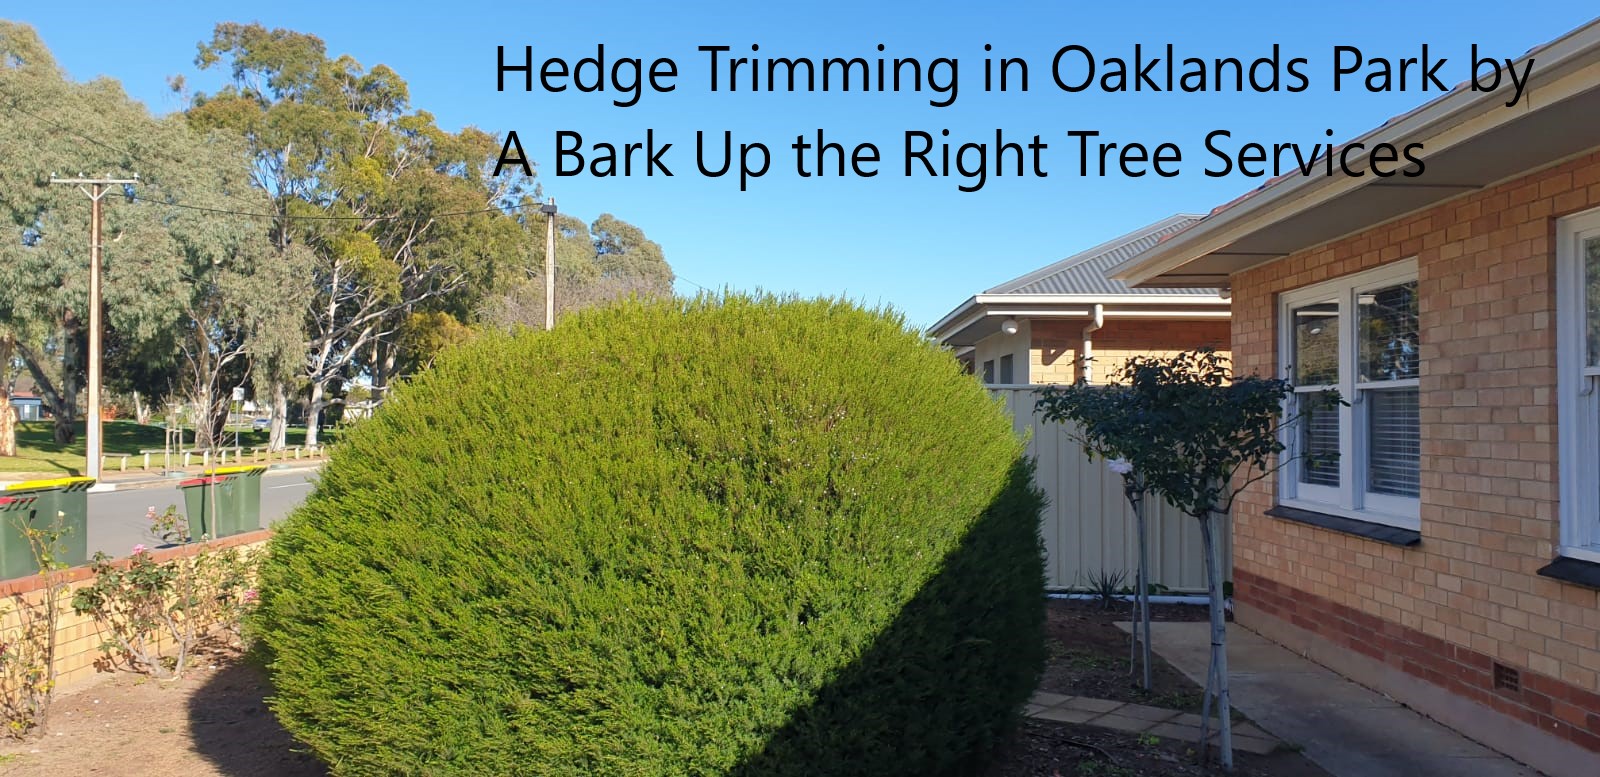 A Bark Up The Right Tree - Adelaide Tree Removals is sharing a COVID-19 update in Oaklands Park.